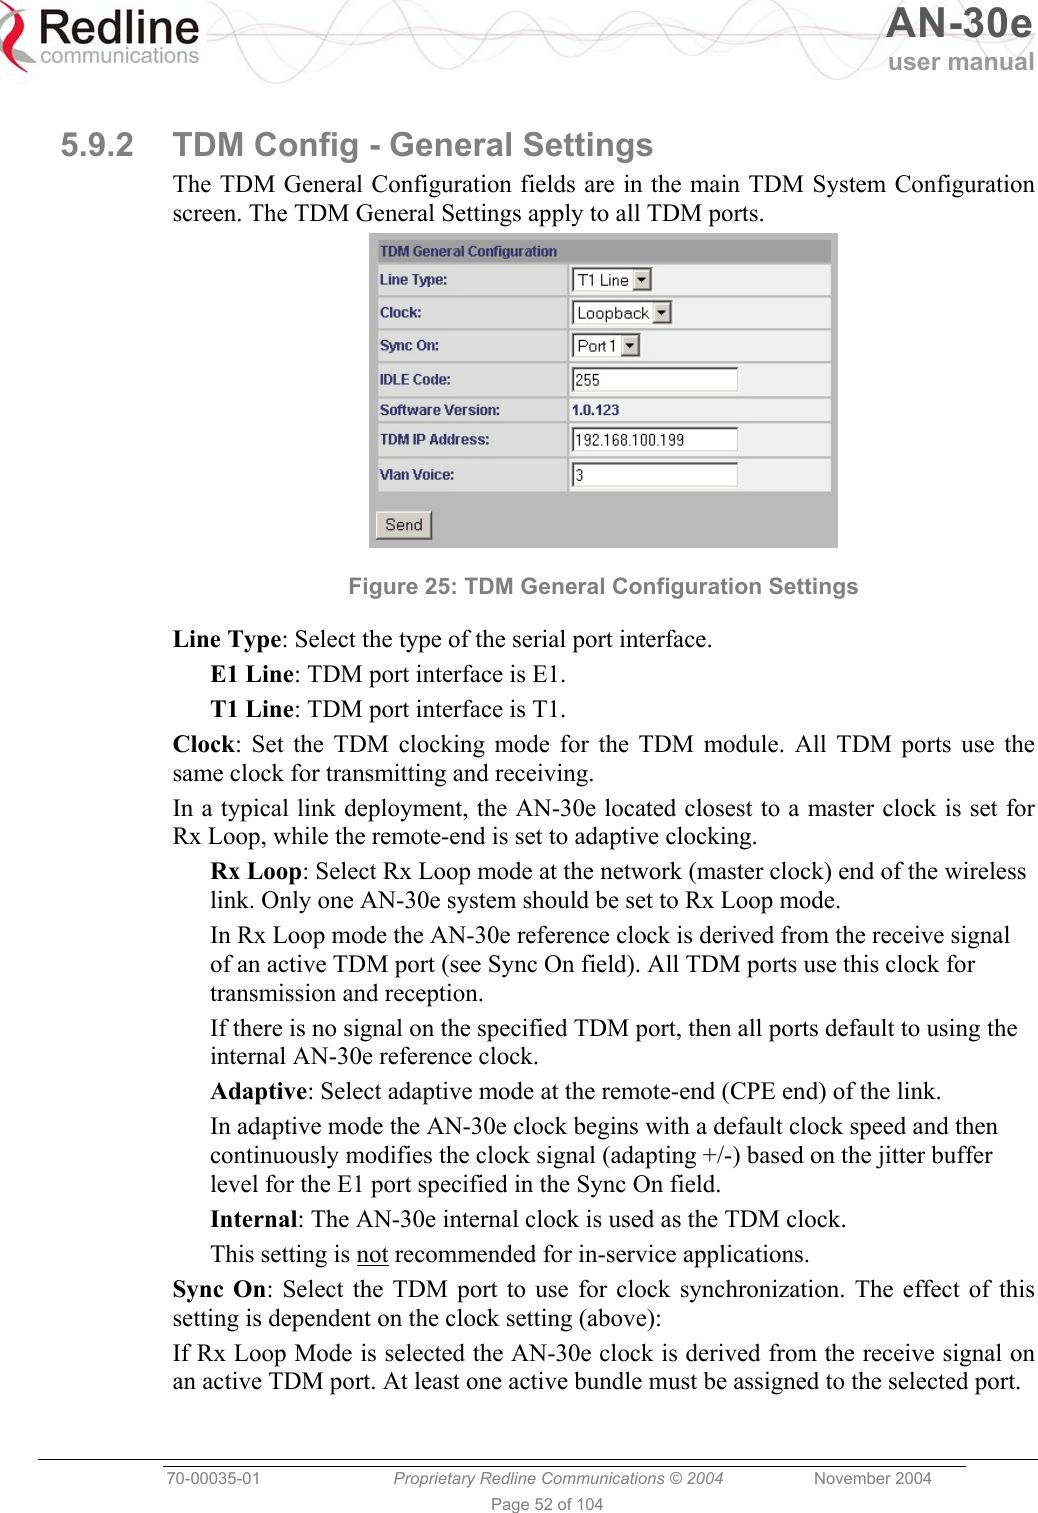   AN-30e user manual  70-00035-01  Proprietary Redline Communications © 2004 November 2004   Page 52 of 104  5.9.2  TDM Config - General Settings The TDM General Configuration fields are in the main TDM System Configuration screen. The TDM General Settings apply to all TDM ports.  Figure 25: TDM General Configuration Settings Line Type: Select the type of the serial port interface. E1 Line: TDM port interface is E1. T1 Line: TDM port interface is T1. Clock: Set the TDM clocking mode for the TDM module. All TDM ports use the same clock for transmitting and receiving. In a typical link deployment, the AN-30e located closest to a master clock is set for Rx Loop, while the remote-end is set to adaptive clocking. Rx Loop: Select Rx Loop mode at the network (master clock) end of the wireless link. Only one AN-30e system should be set to Rx Loop mode.  In Rx Loop mode the AN-30e reference clock is derived from the receive signal of an active TDM port (see Sync On field). All TDM ports use this clock for transmission and reception. If there is no signal on the specified TDM port, then all ports default to using the internal AN-30e reference clock. Adaptive: Select adaptive mode at the remote-end (CPE end) of the link. In adaptive mode the AN-30e clock begins with a default clock speed and then continuously modifies the clock signal (adapting +/-) based on the jitter buffer level for the E1 port specified in the Sync On field. Internal: The AN-30e internal clock is used as the TDM clock. This setting is not recommended for in-service applications. Sync On: Select the TDM port to use for clock synchronization. The effect of this setting is dependent on the clock setting (above): If Rx Loop Mode is selected the AN-30e clock is derived from the receive signal on an active TDM port. At least one active bundle must be assigned to the selected port. 